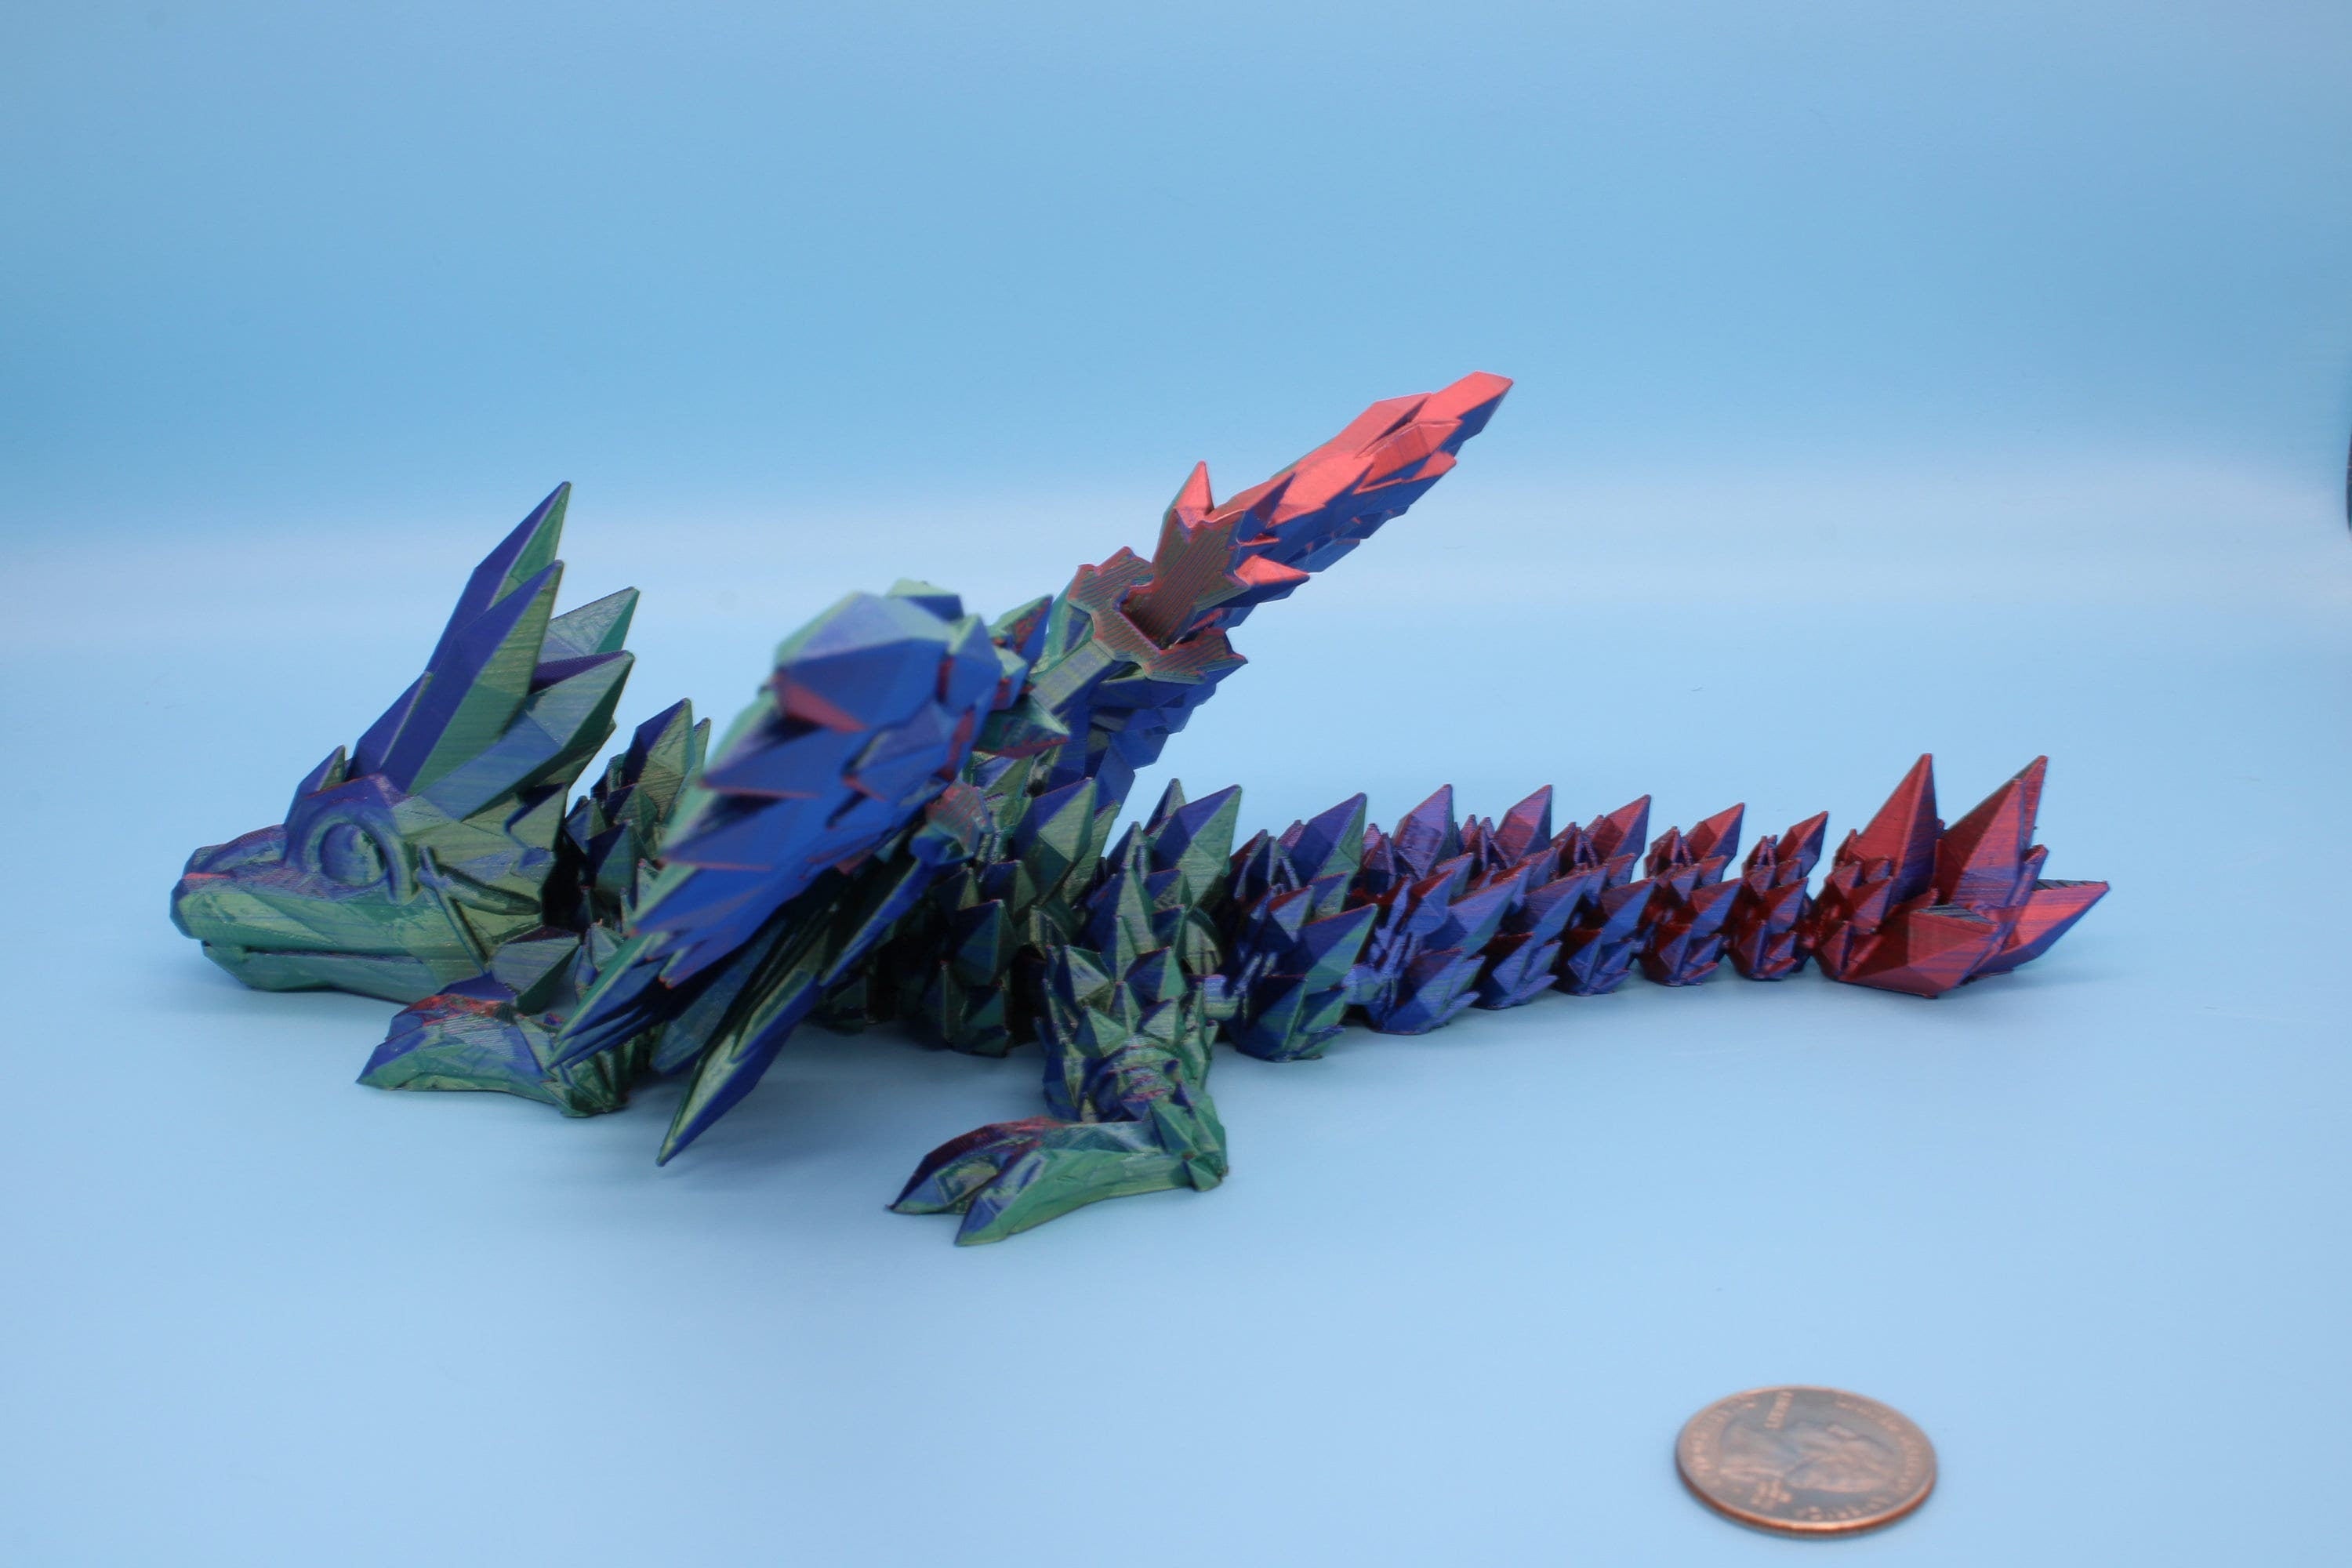 Baby Crystal Winged Dragon- Rainbow | 3D Printed | Fidget Toy | Flexi | 11.5 in. | Stress Relief | Dragon Toy.